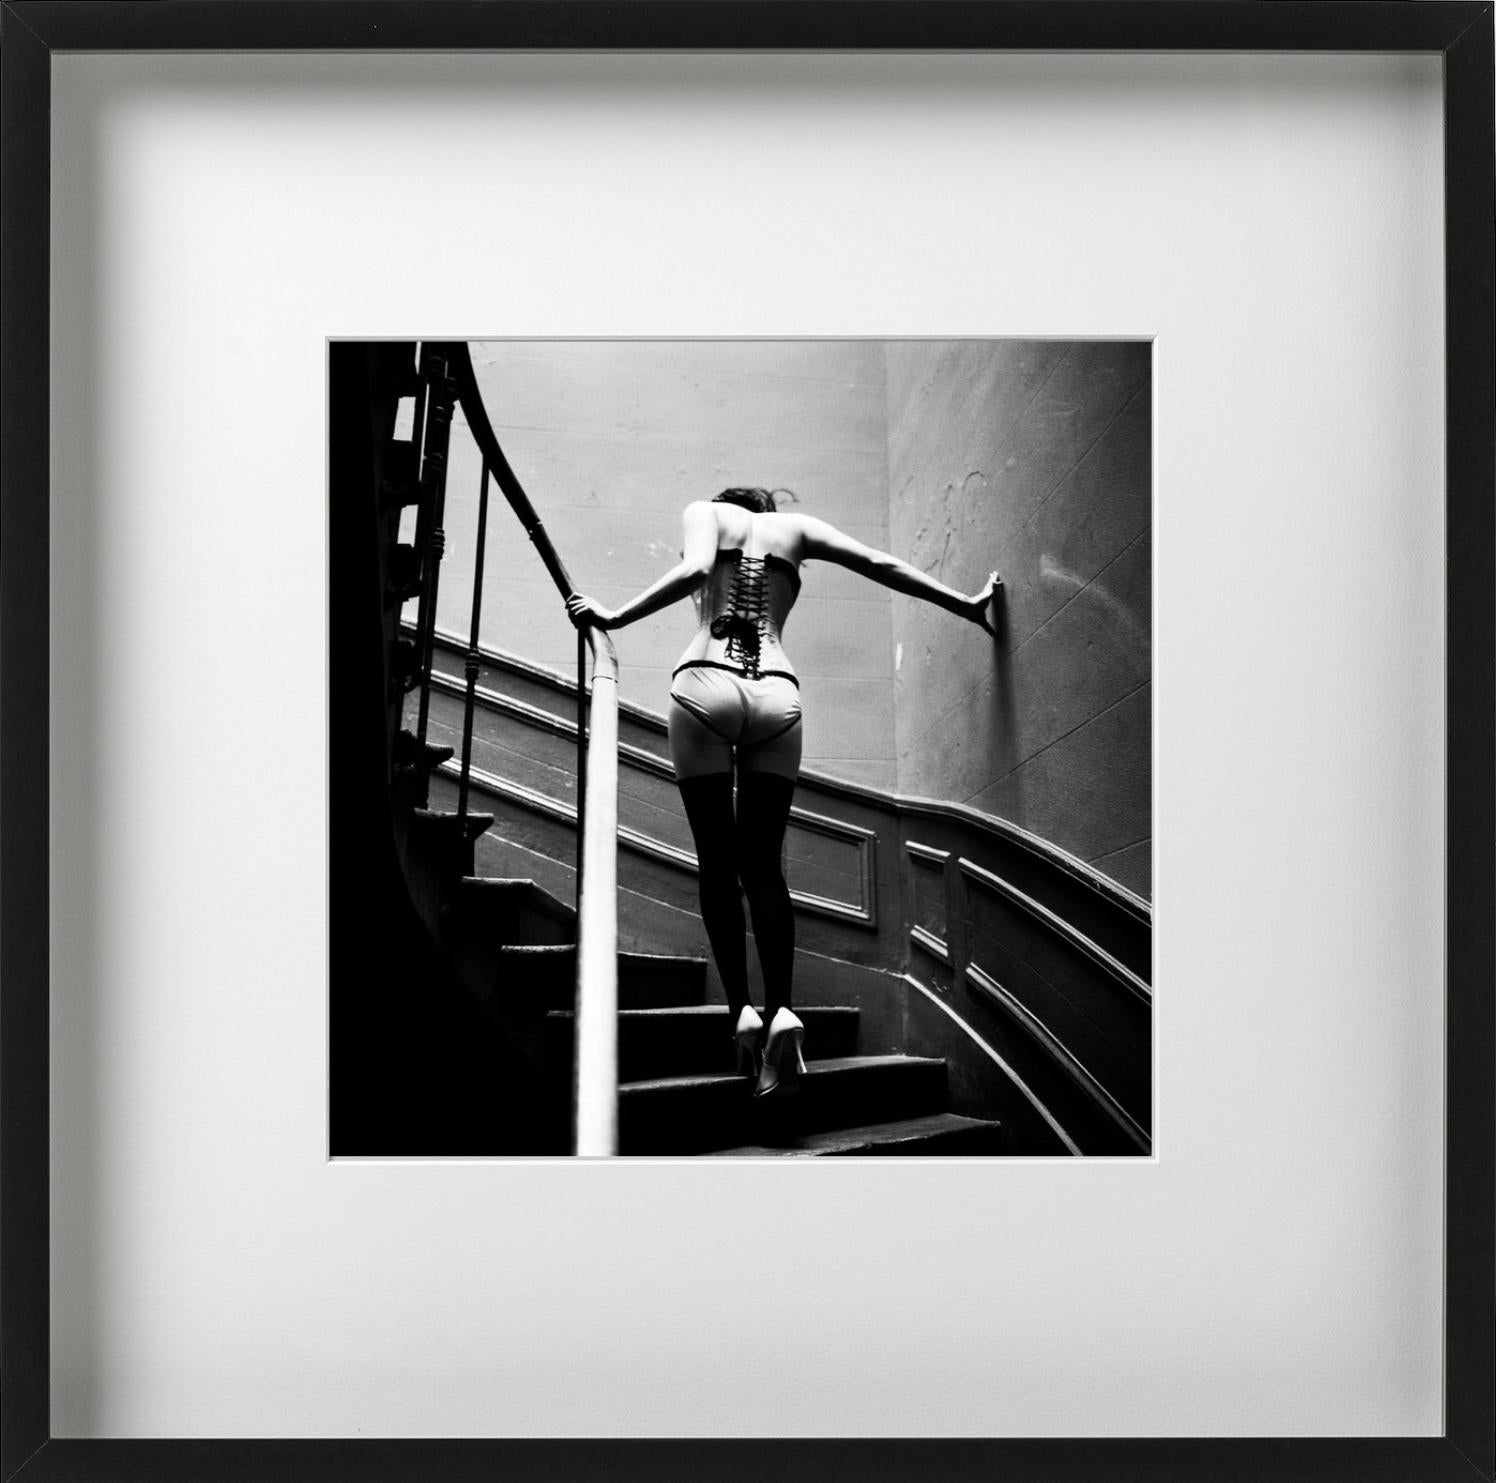 All prints are limited edition. Available in multiple sizes. High-end framing on request.

All prints are done and signed by the artist. The collector receives an additional certificate of authenticity from the gallery.

'Upstairs' depicts a